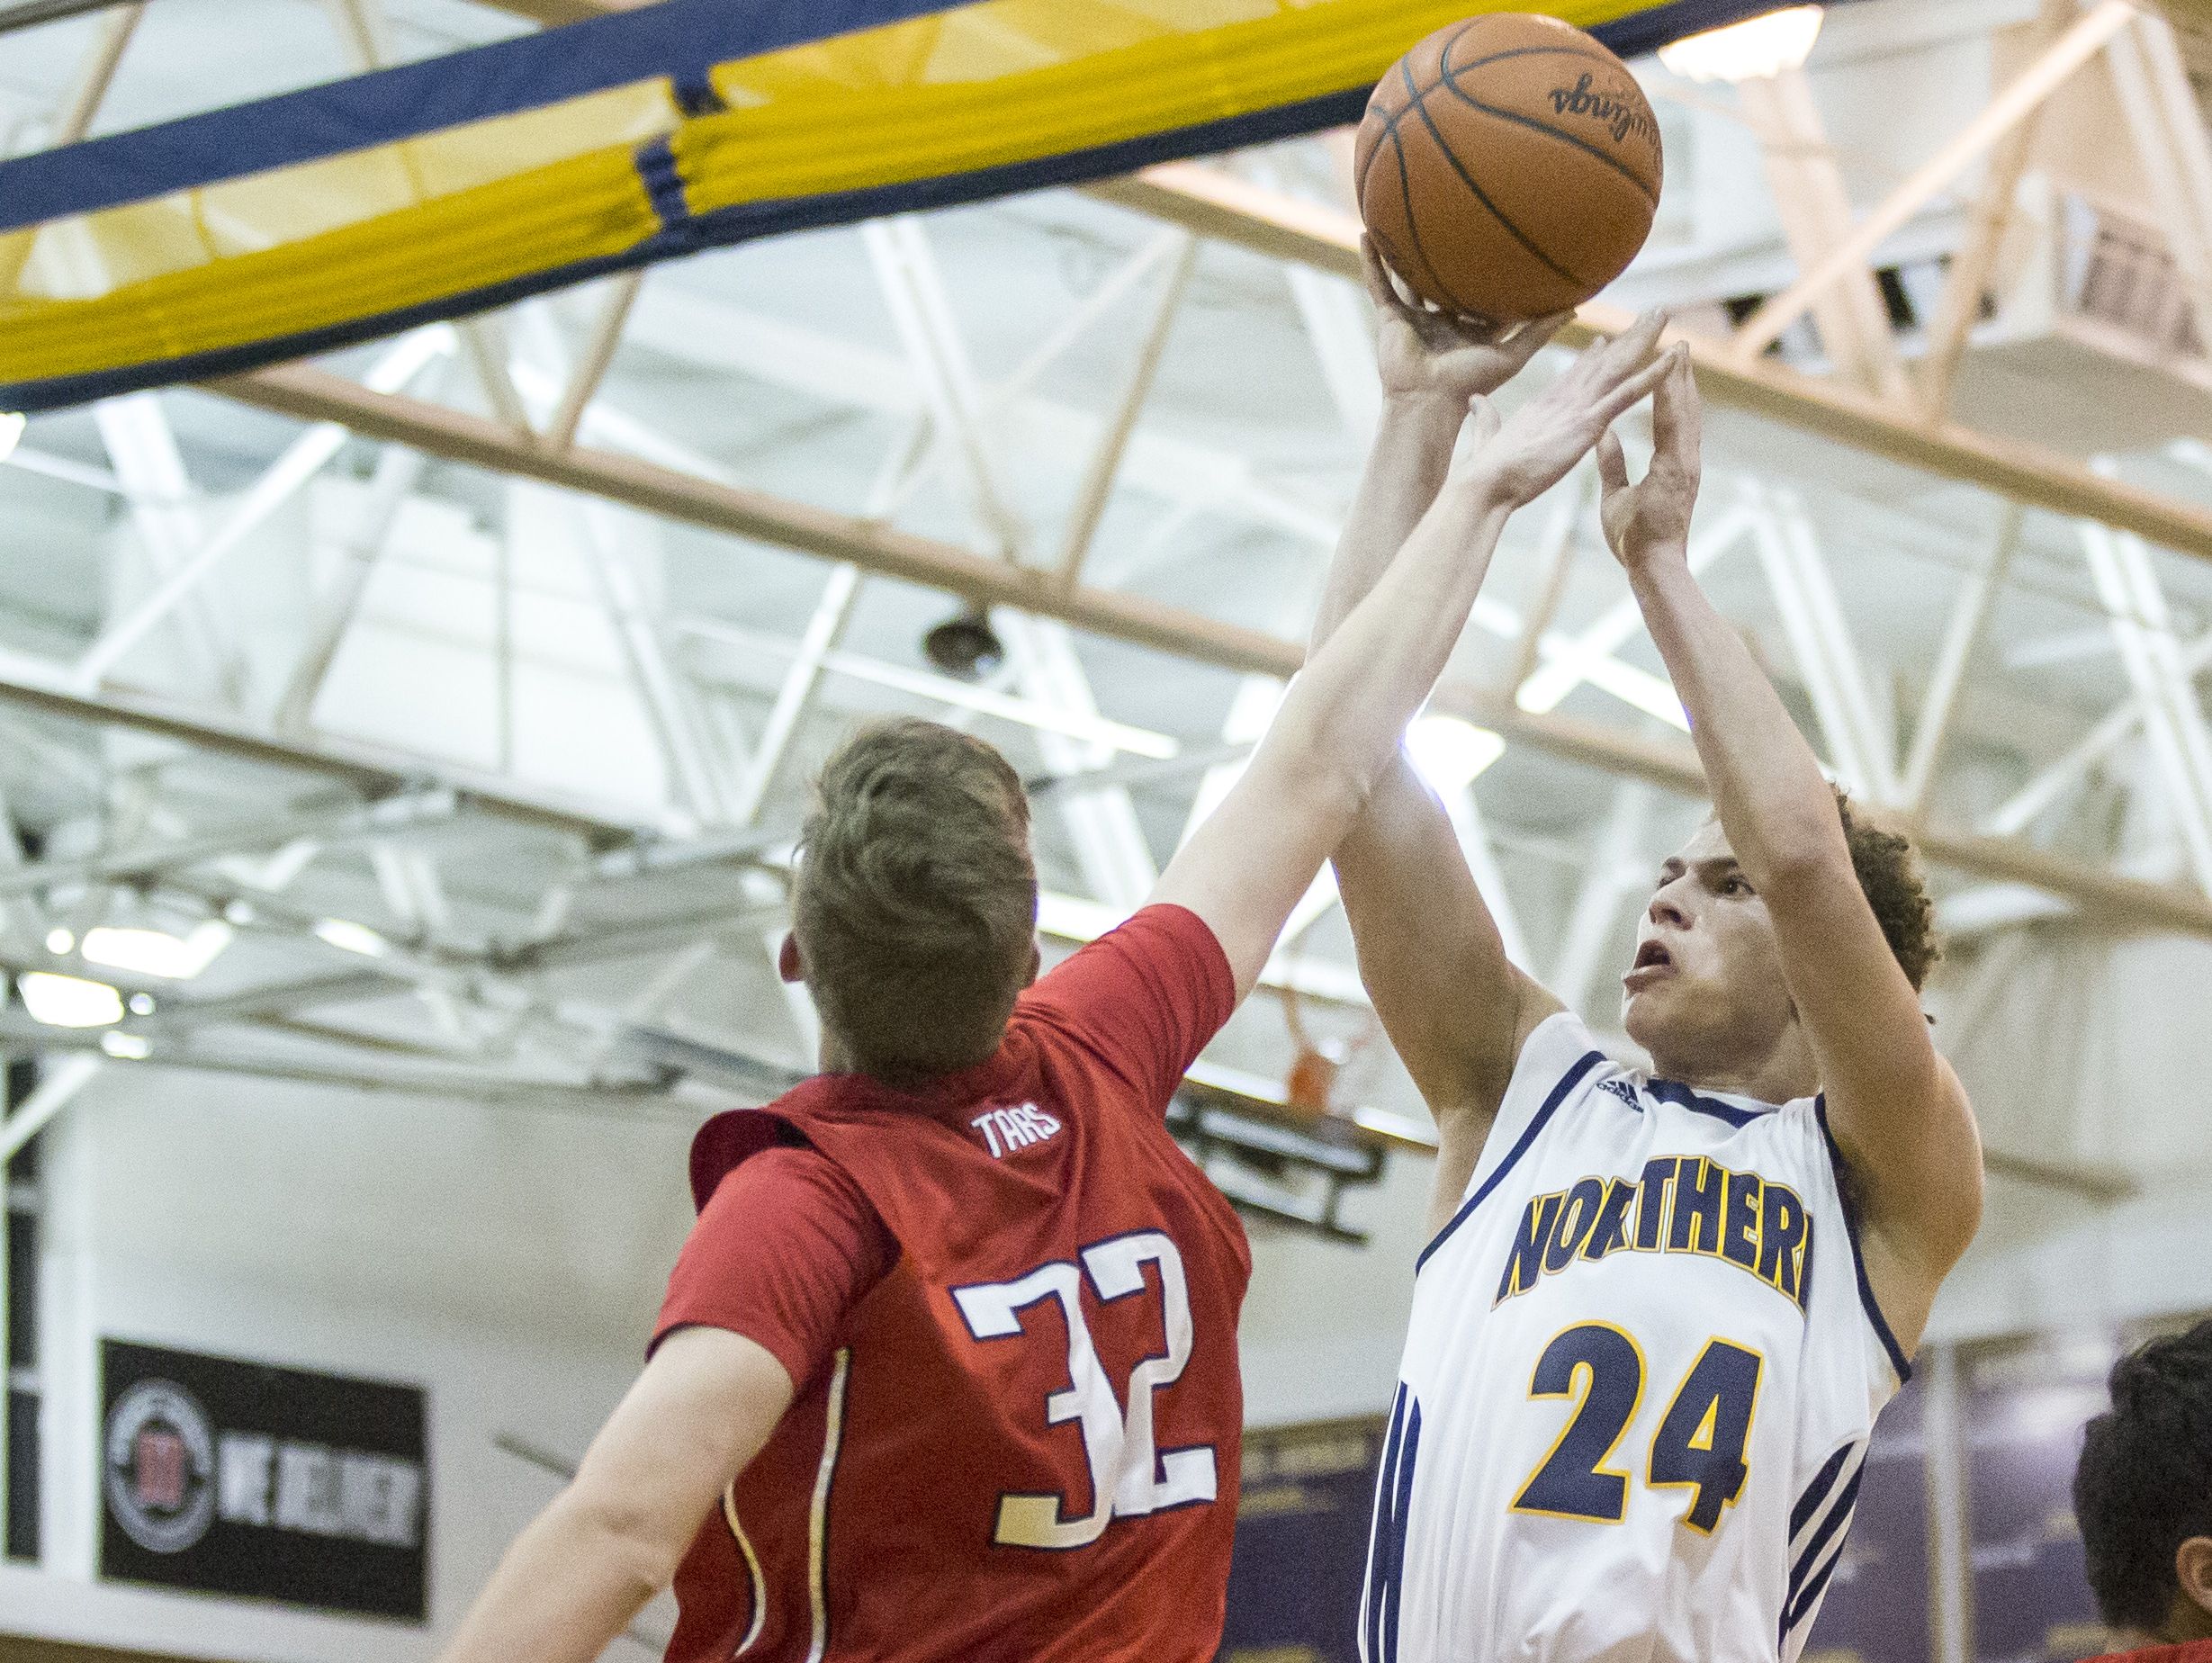 Port Huron Northern senior Geryd Welsh takes a shot in front of Anchor Bay junior Ben Ratkov during a basketball game Thursday, Feb. 11, 2016 at Port Huron Northern High School.